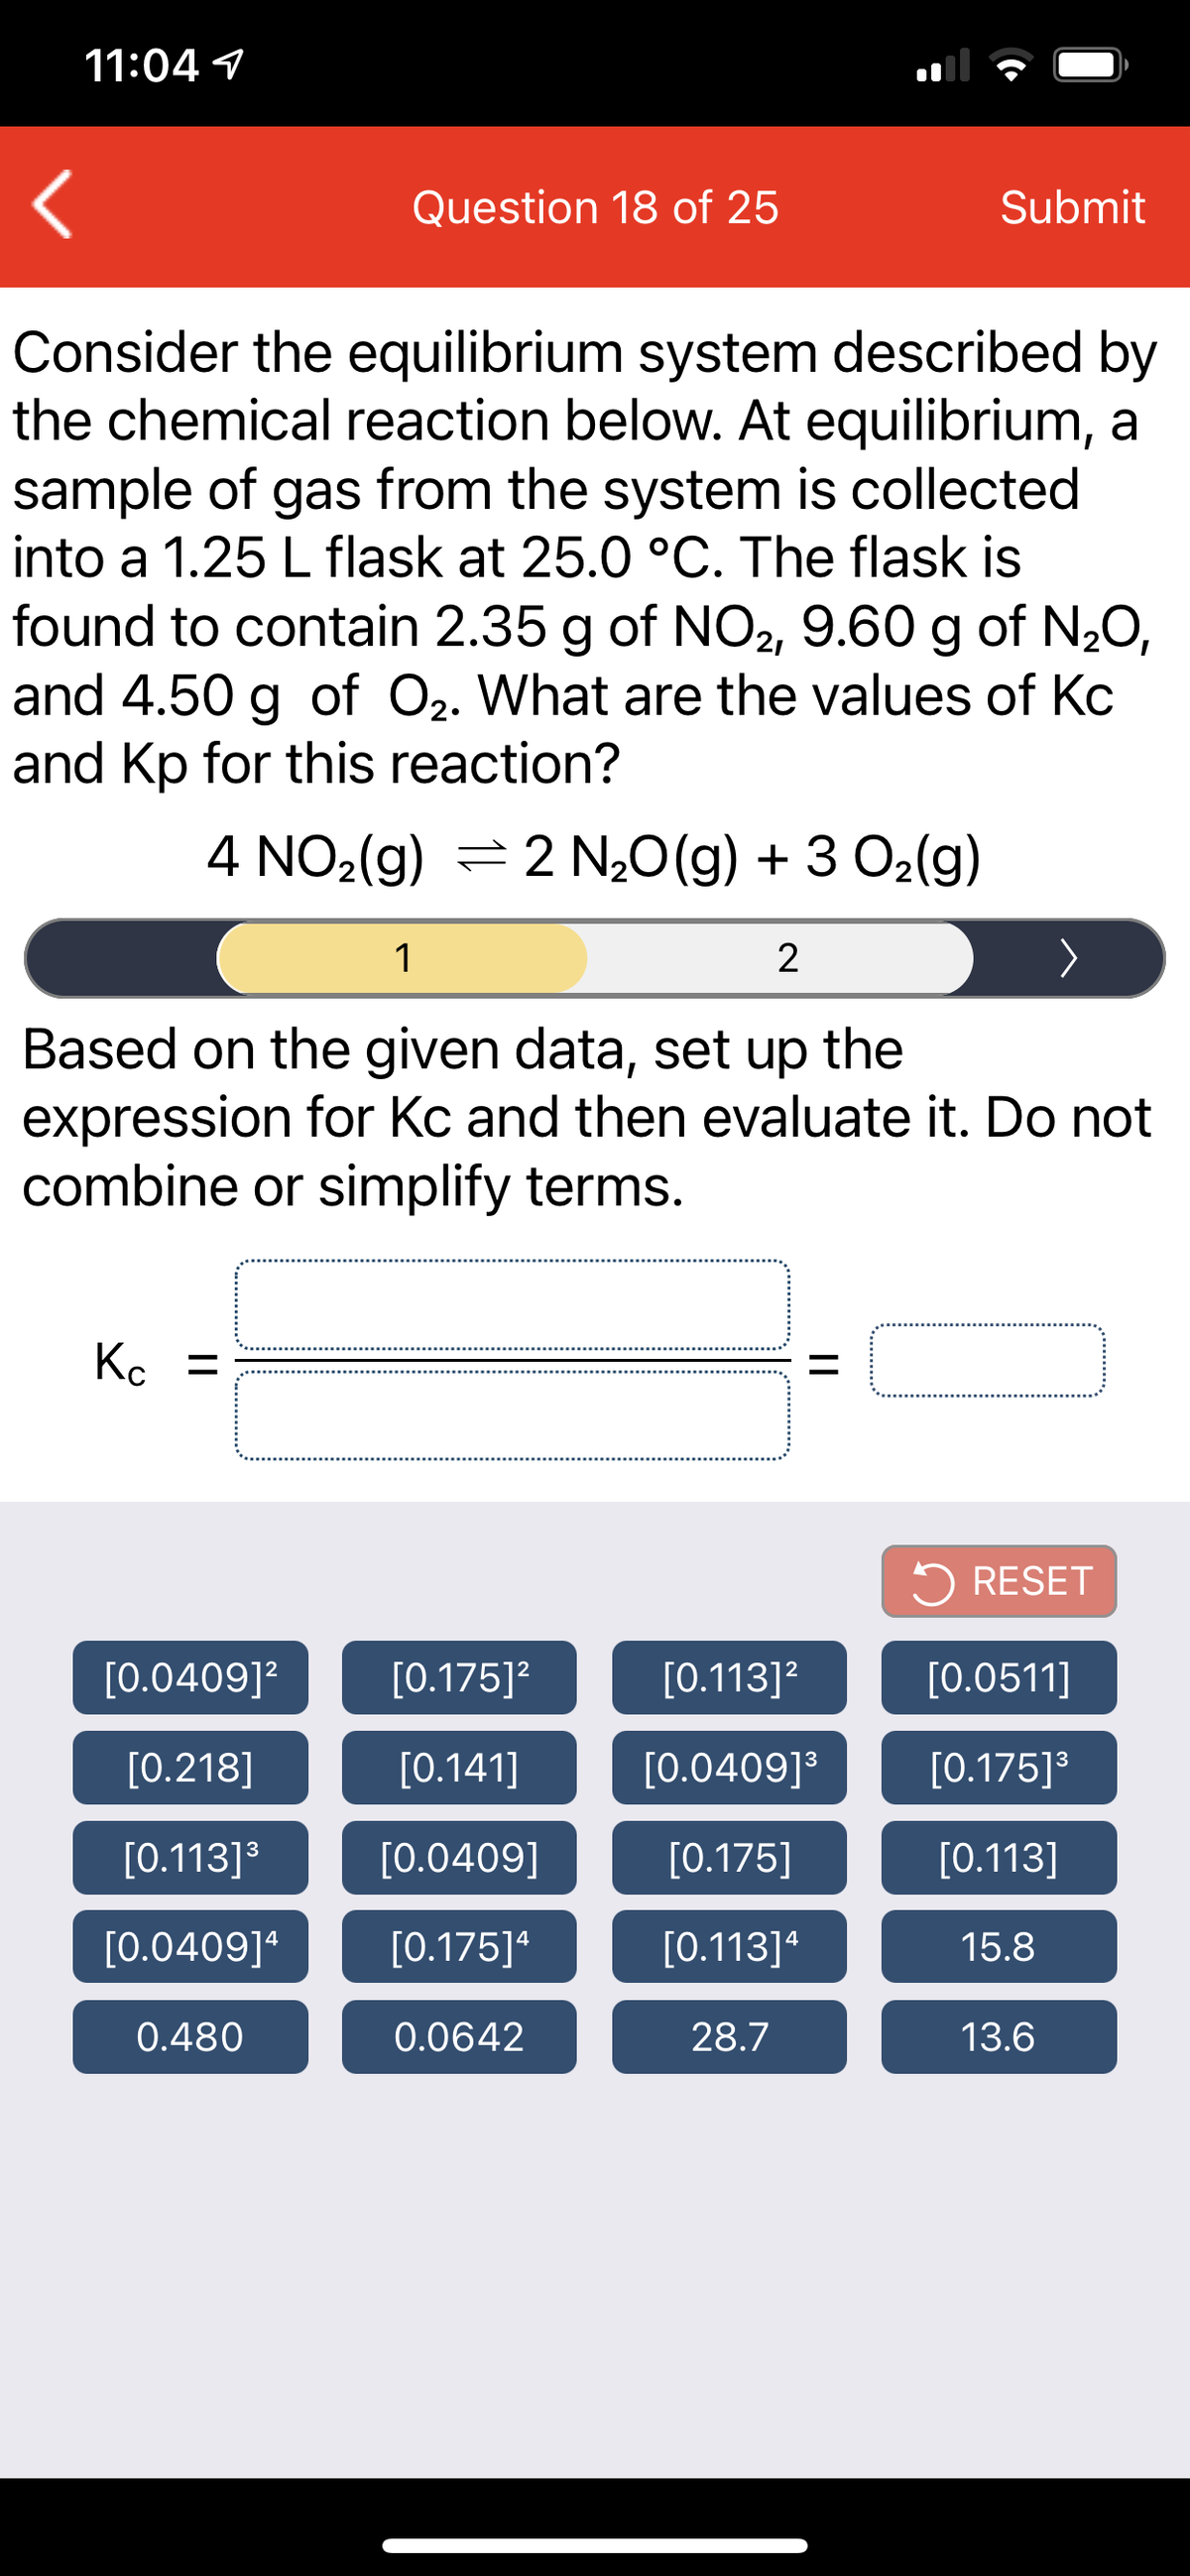 11:04 1
Question 18 of 25
Submit
Consider the equilibrium system described by
the chemical reaction below. At equilibrium, a
sample of gas from the system is collected
into a 1.25 L flask at 25.0 °C. The flask is
found to contain 2.35 g of NO2, 9.60 g of N20,
and 4.50 g of O2. What are the values of Kc
and Kp for this reaction?
4 NO2(g) = 2 N20(g) + 3 O2(g)
1
2
Based on the given data, set up the
expression for Kc and then evaluate it. Do not
combine or simplify terms.
Kc =
5 RESET
[0.0409]?
[0.175]?
[0.113]?
[0.0511]
[0.218]
[О.141]
[0.0409]
[0.175]3
[0.113]3
[0.0409]
[0.175]
[0.113]
[0.0409]ª
[0.175]ª
[0.113]ª
15.8
0.480
0.0642
28.7
13.6
